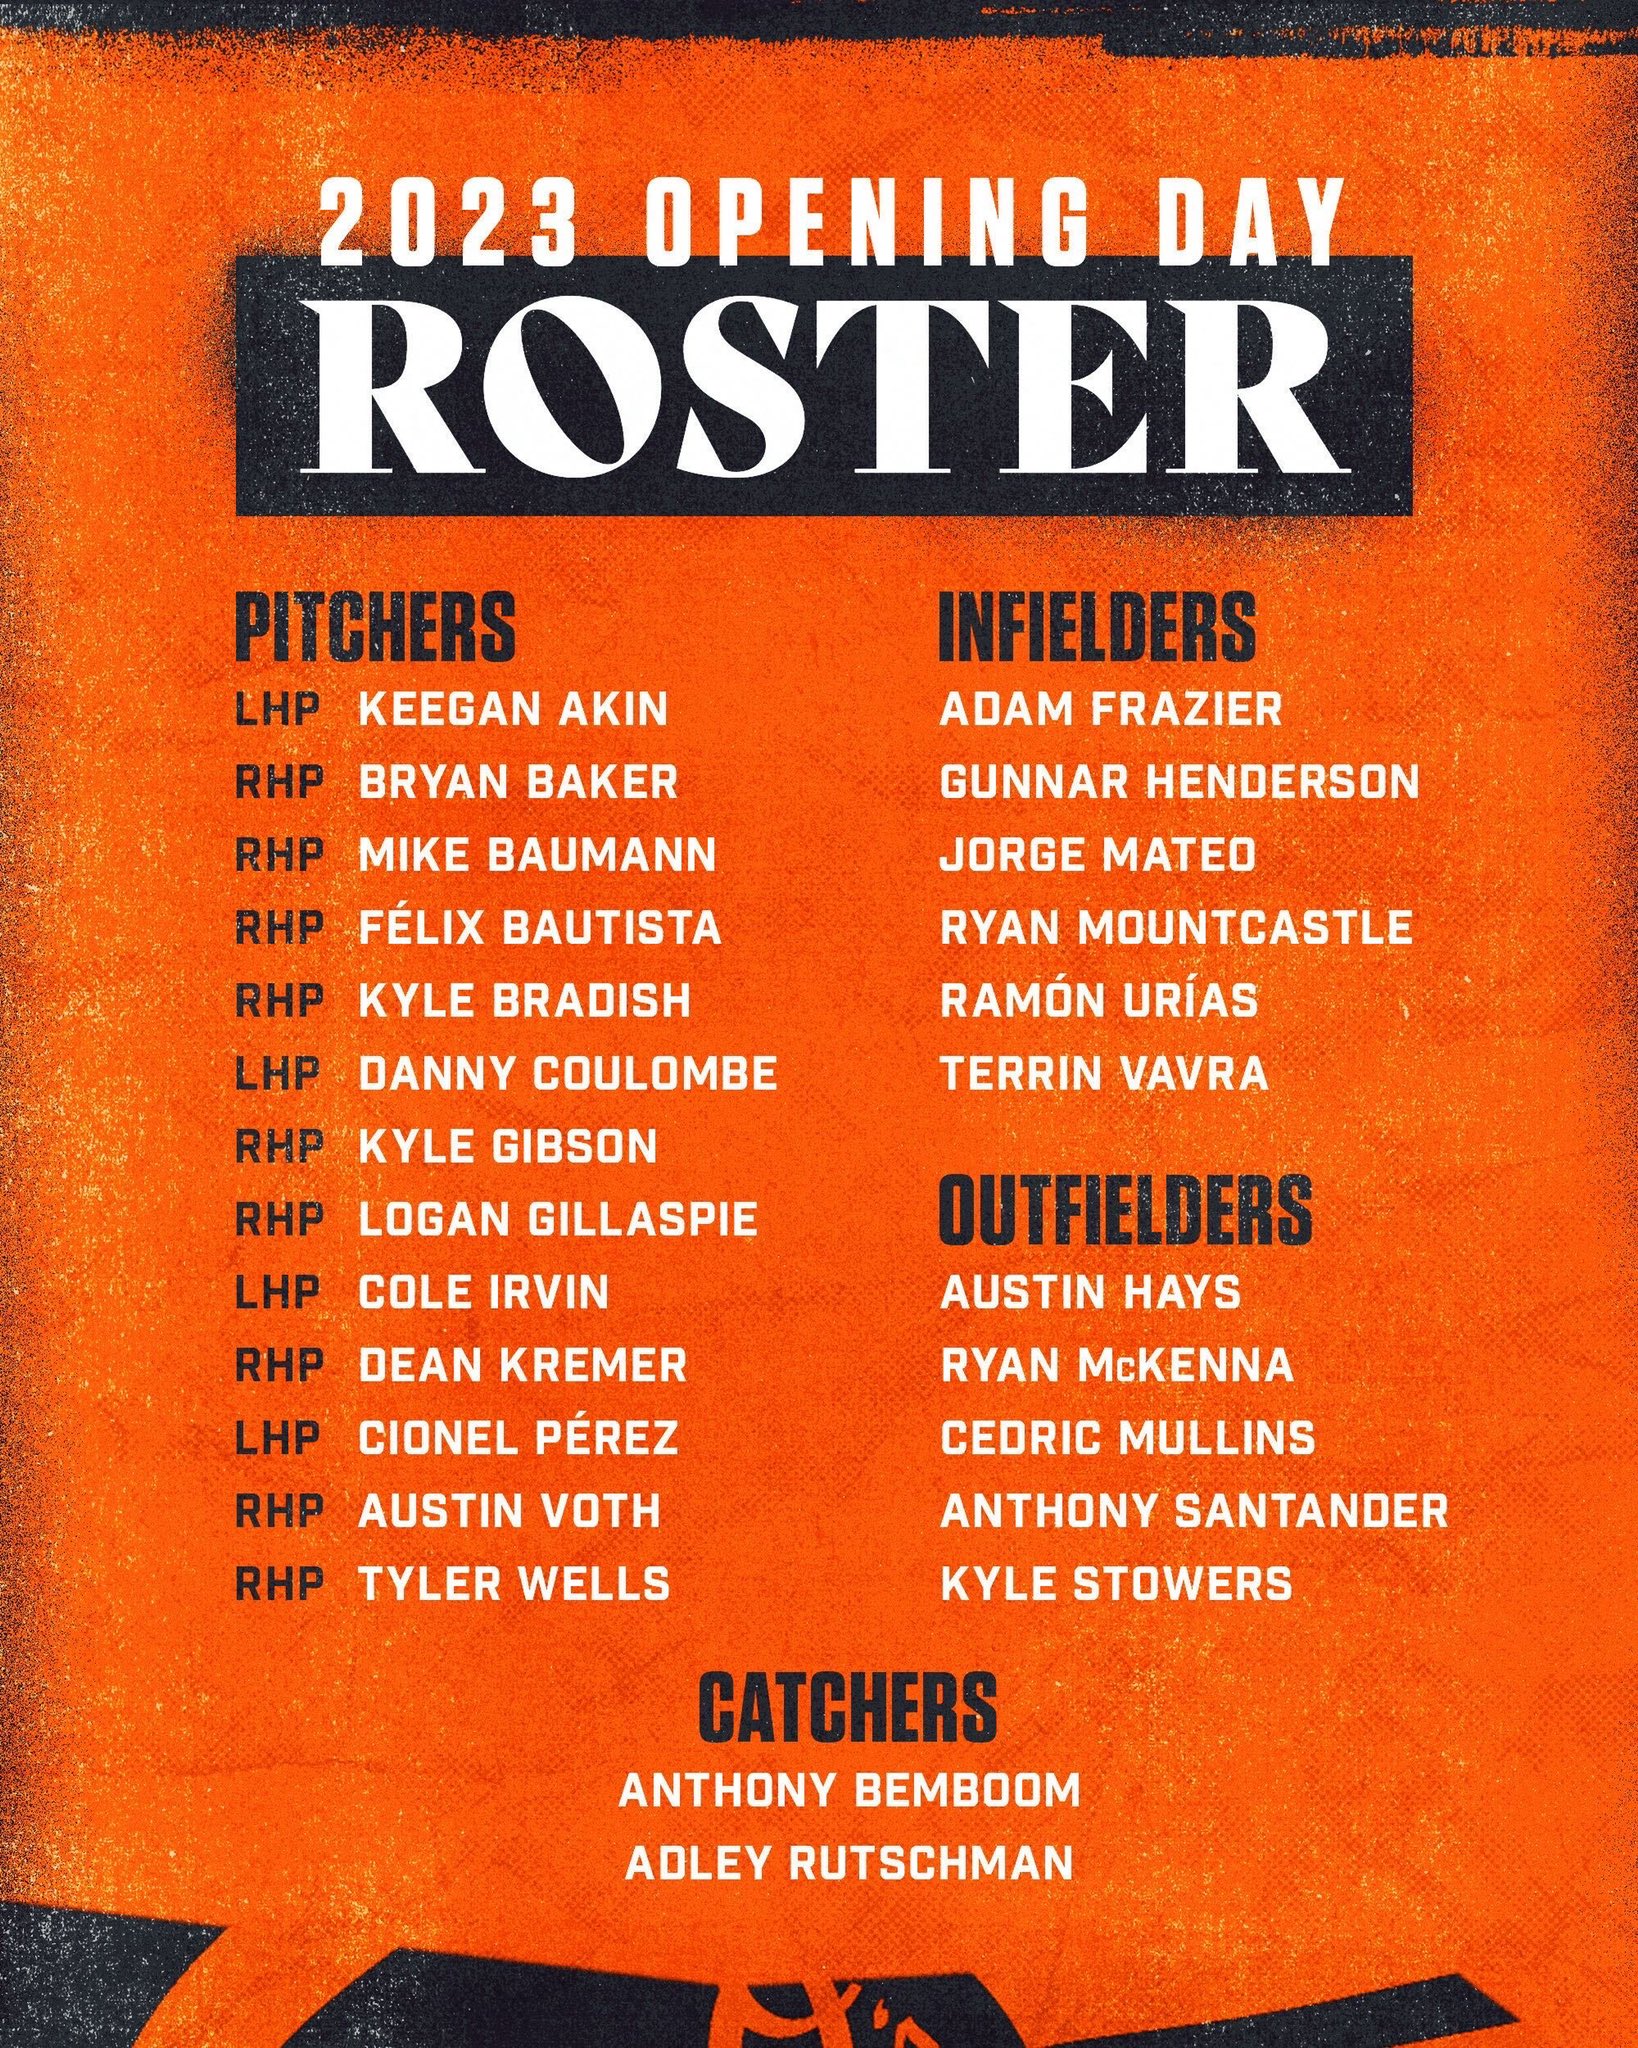 Baltimore Orioles on Twitter "Our 2023 Opening Day roster! https//t